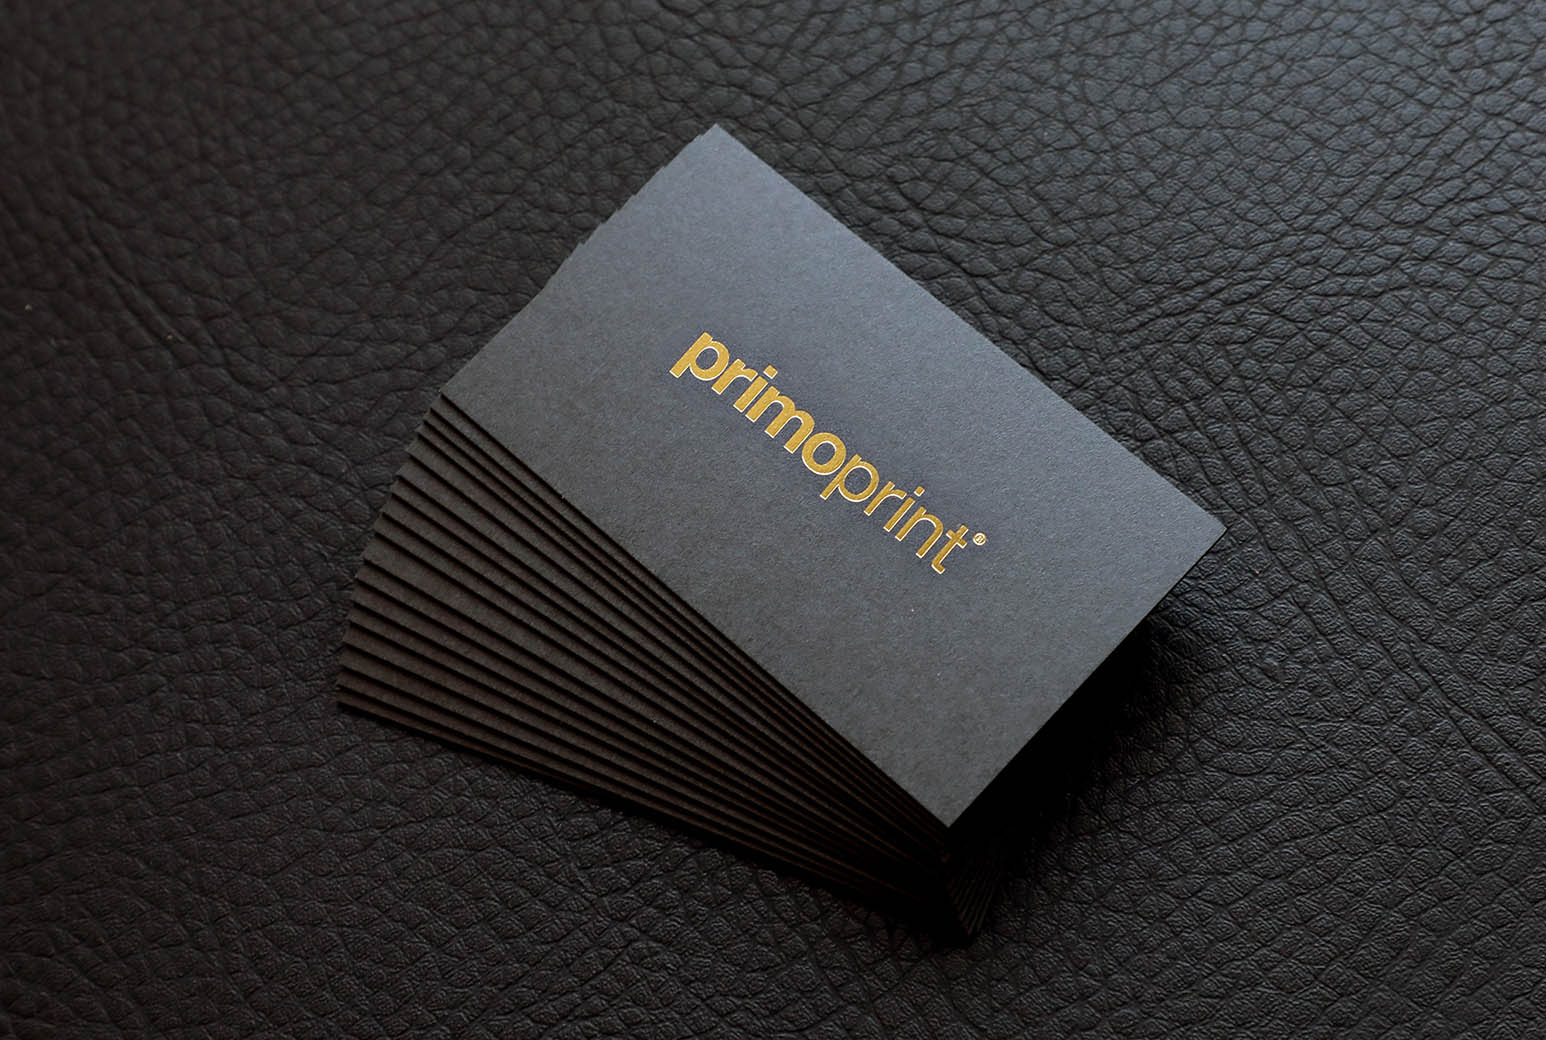 We're excited to announce is the ability to custom request stamped foil on painted edge business cards.